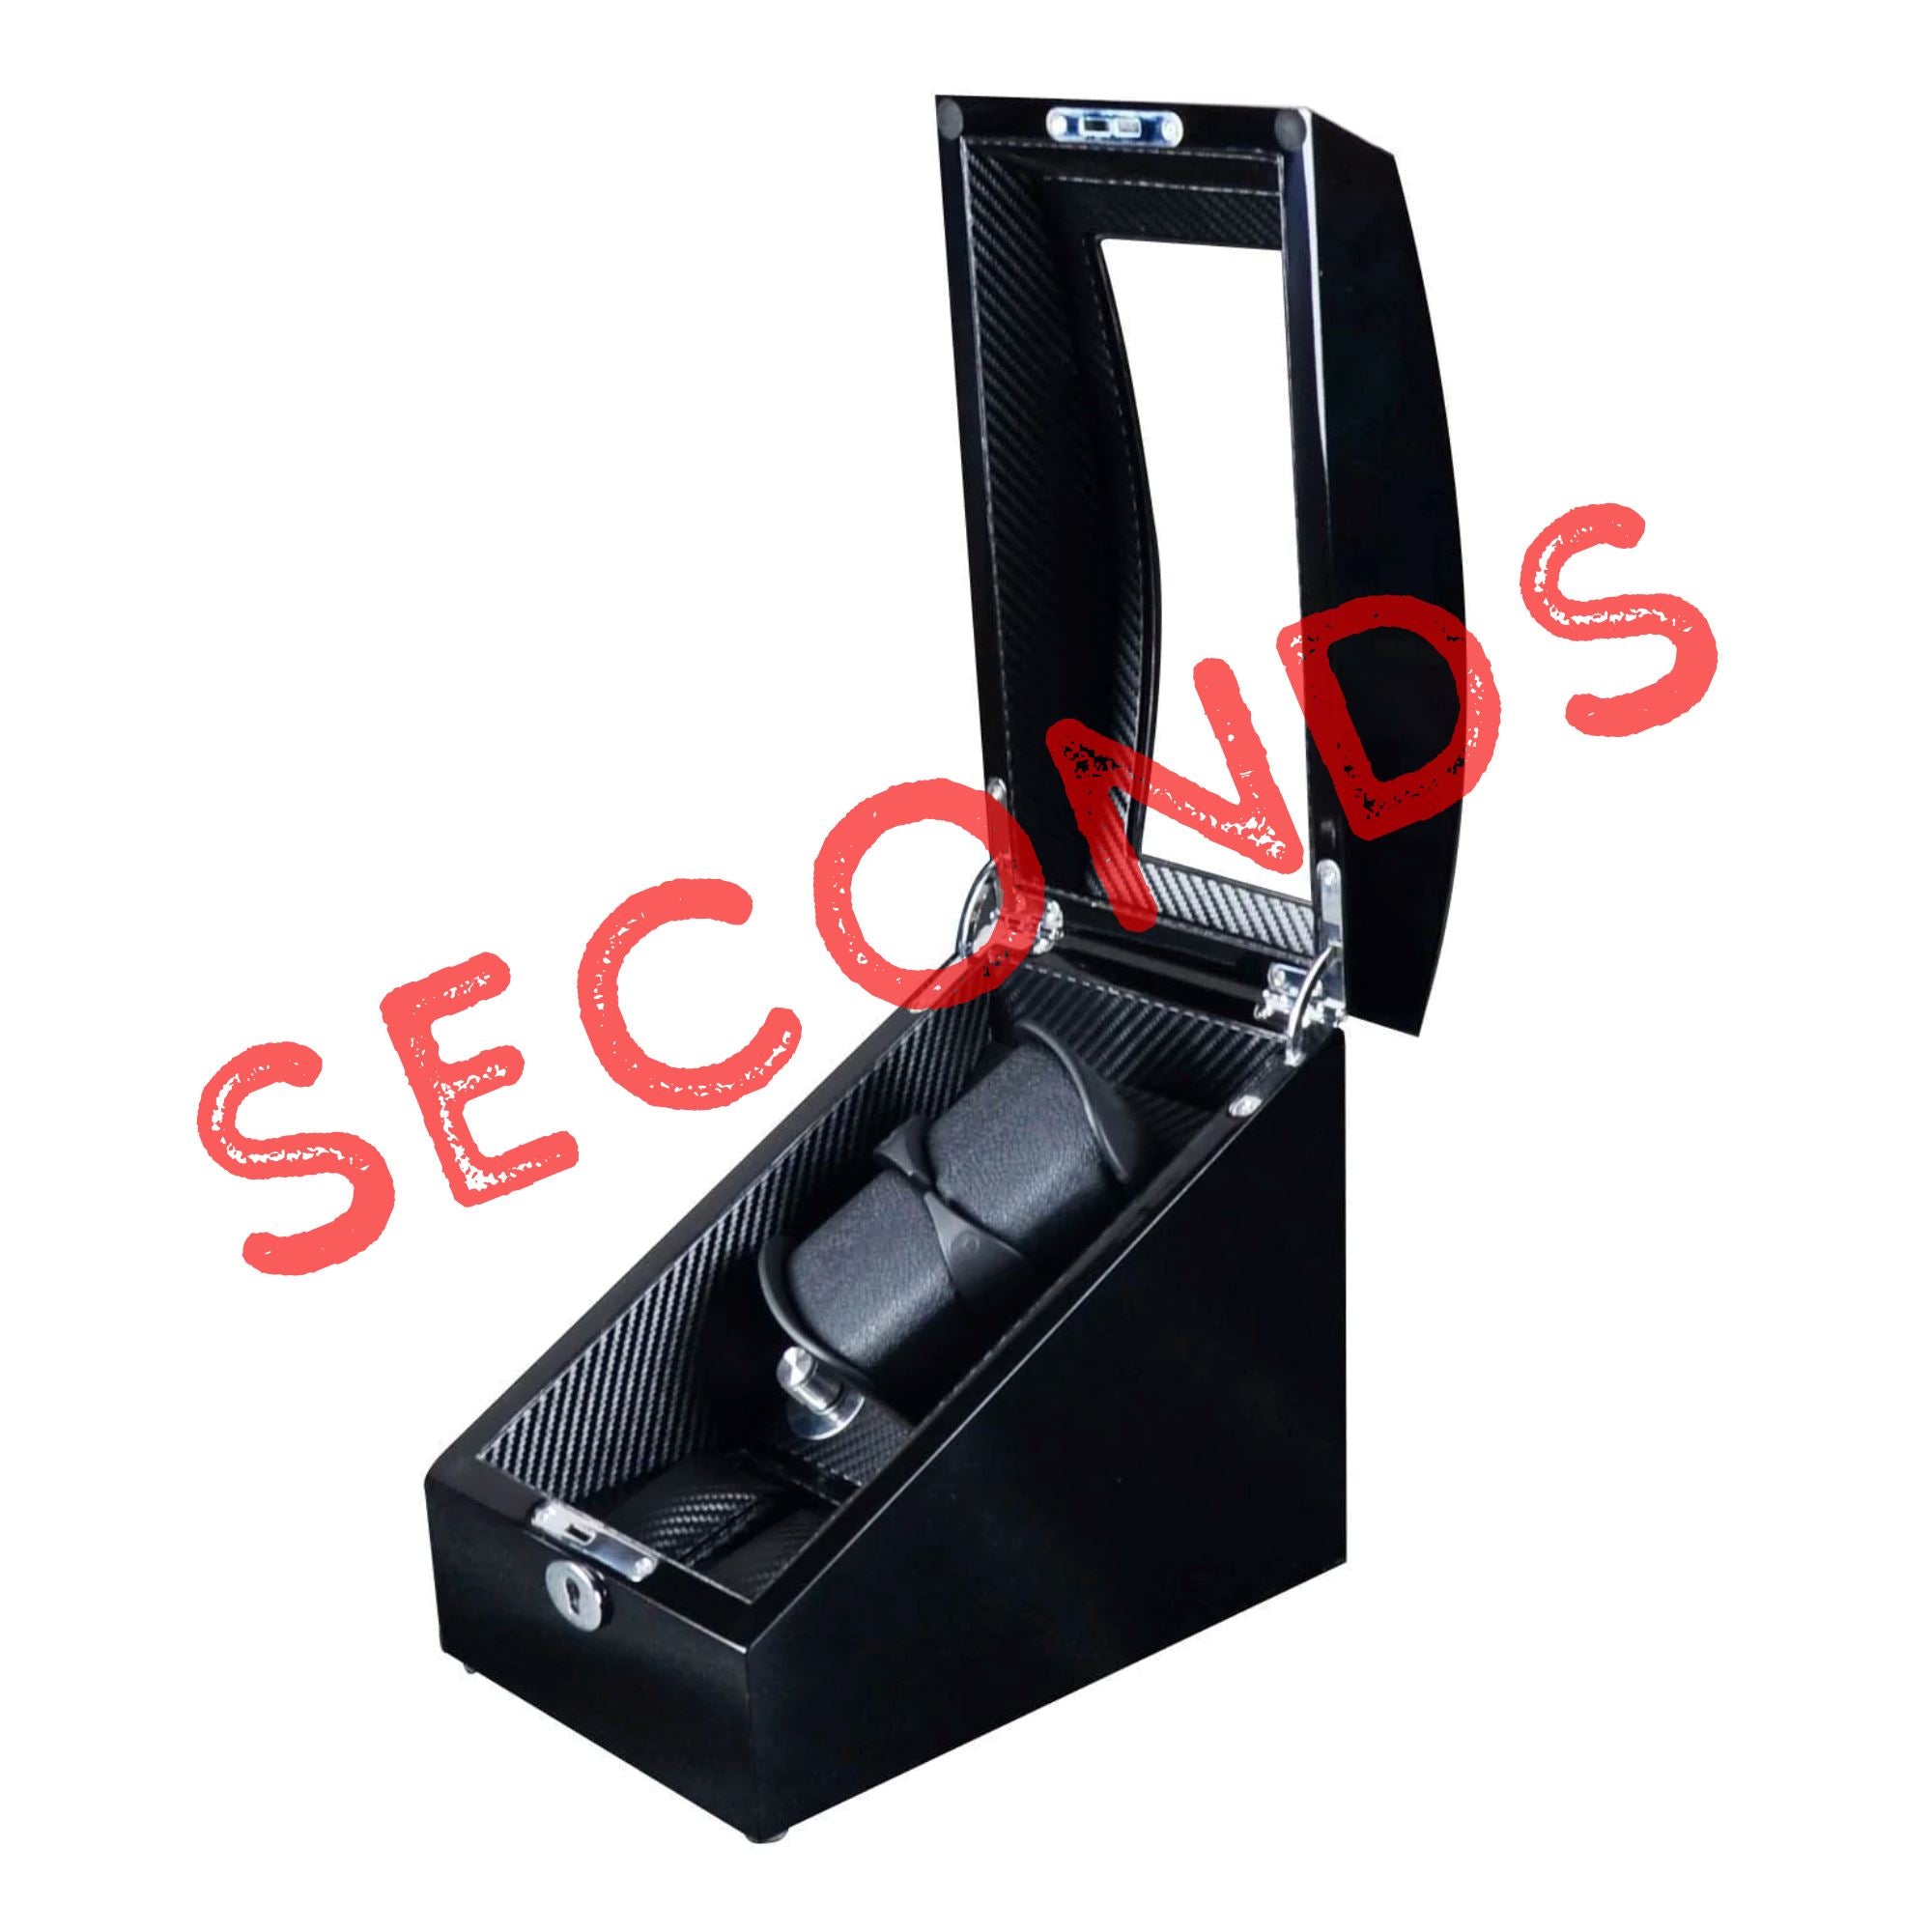 Seconds - Avoca Watch Winder Box for 2 + 2 Watches in Black (a) Seconds Clinks 